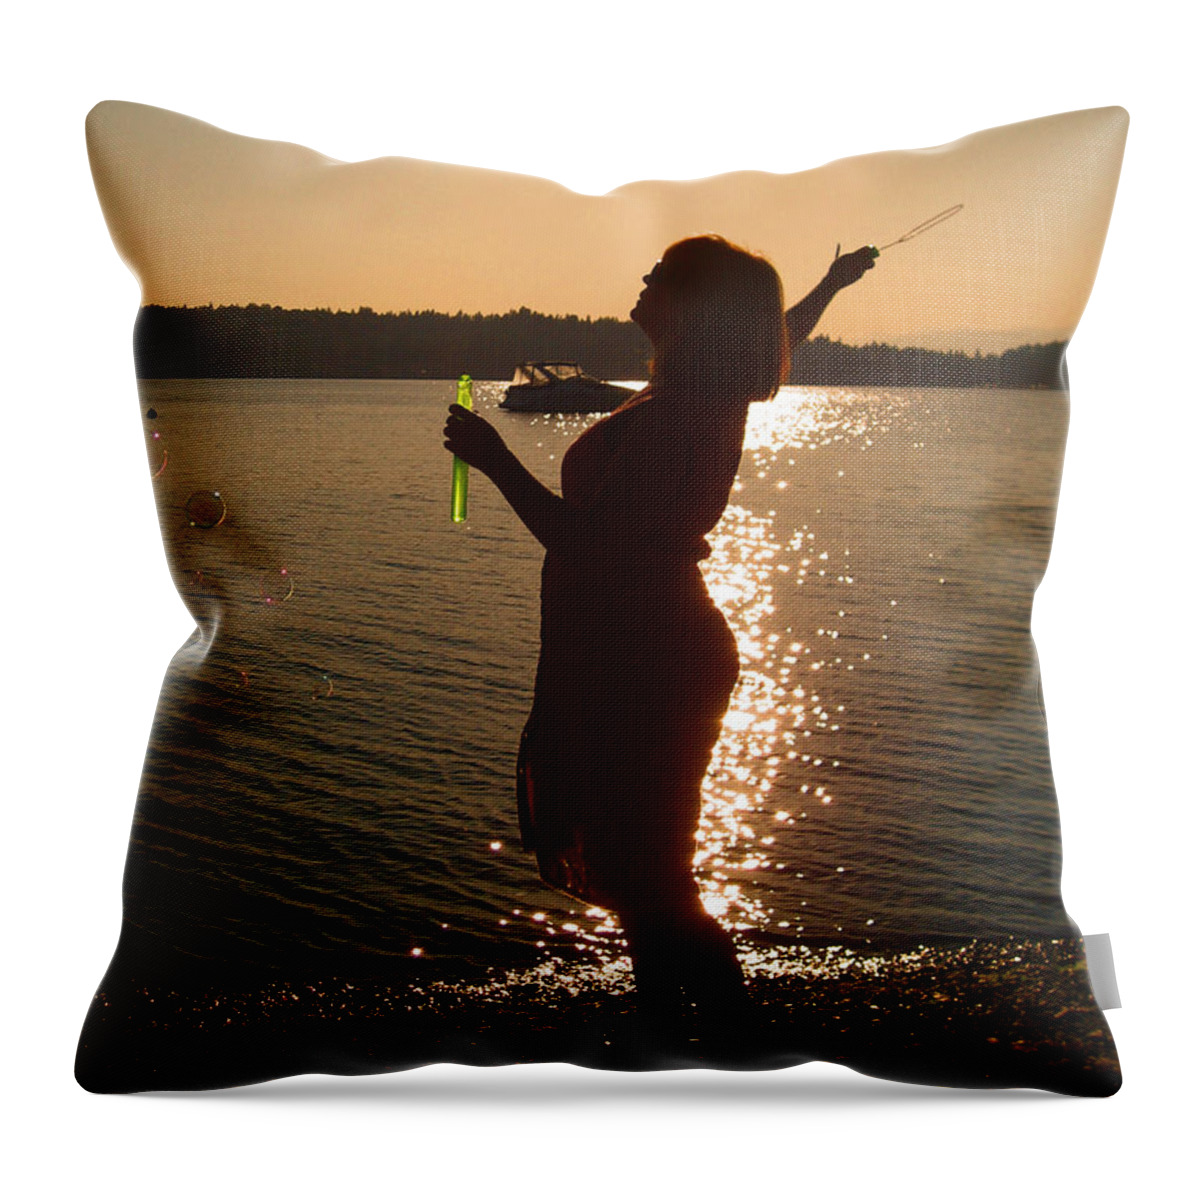 Sunset Throw Pillow featuring the photograph She Blows Bubbles by Kym Backland